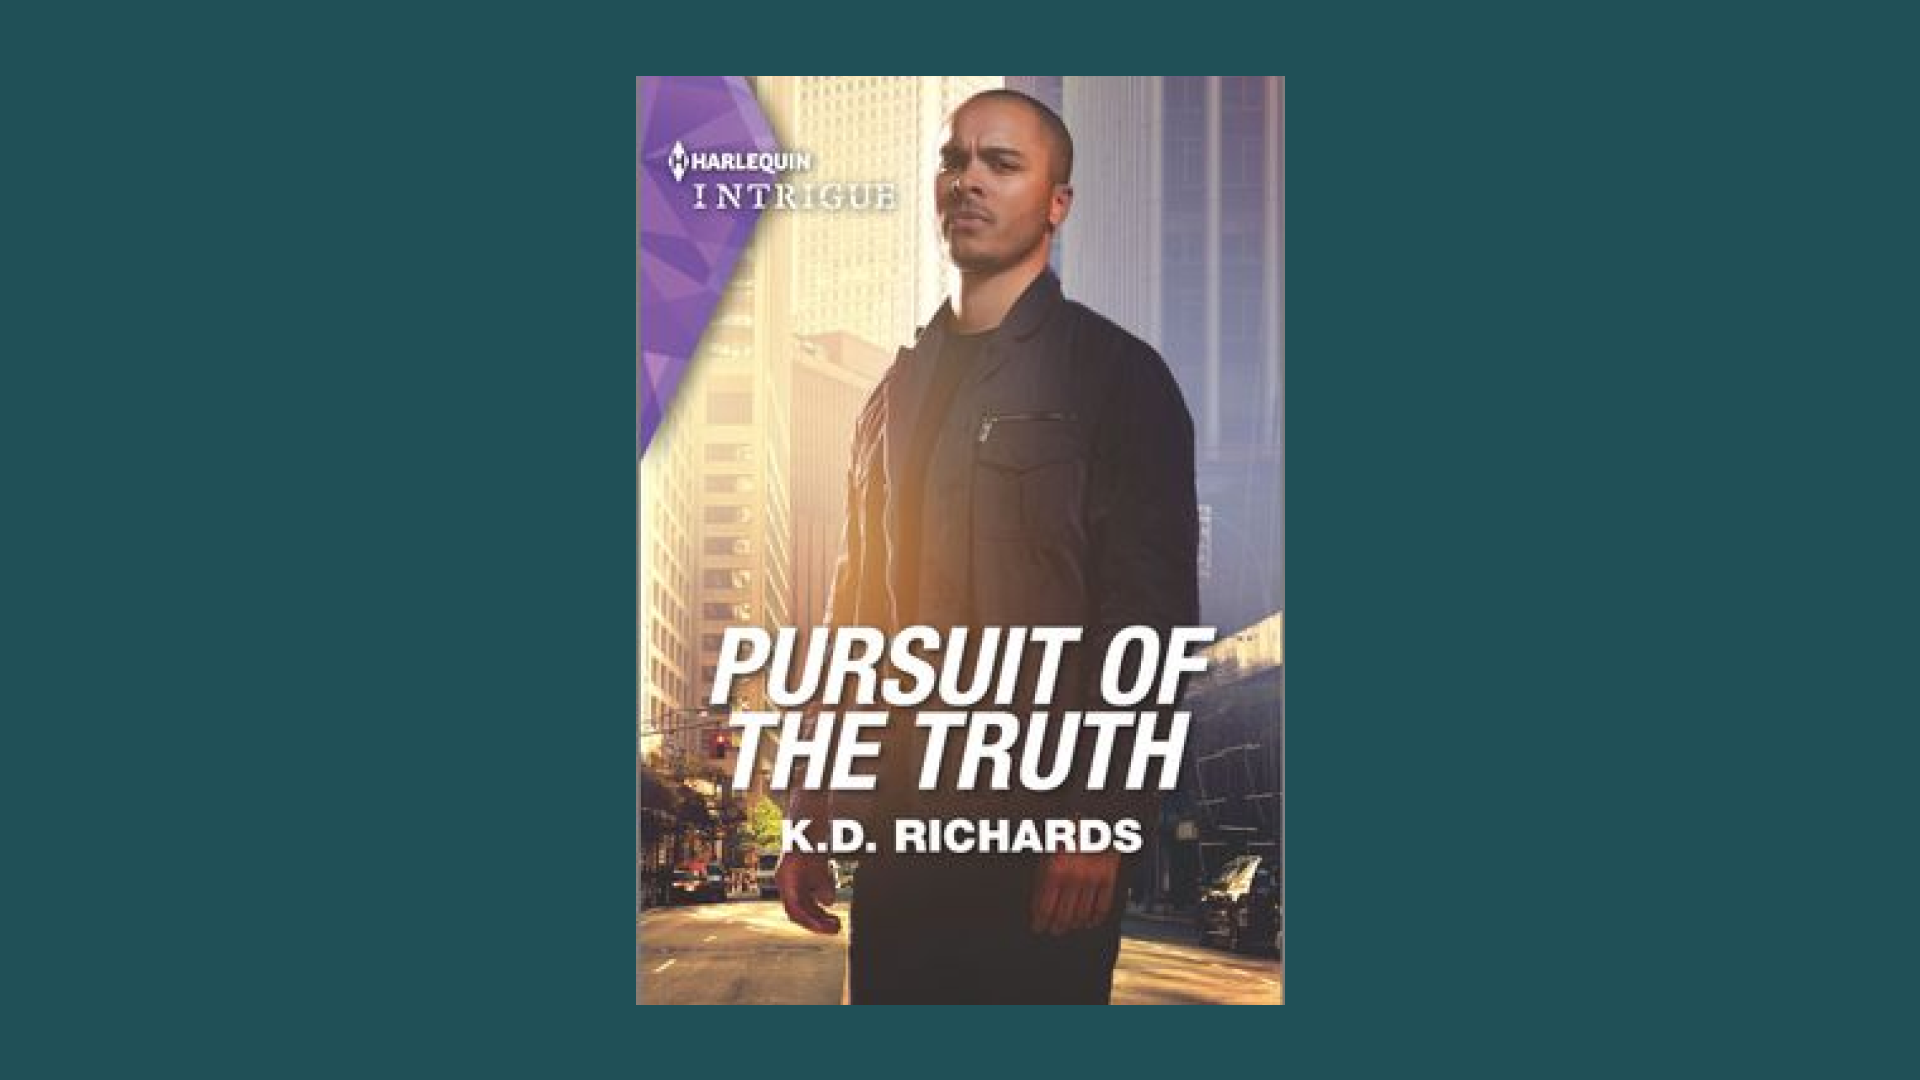 “Pursuit of the Truth” by K.D. Richards